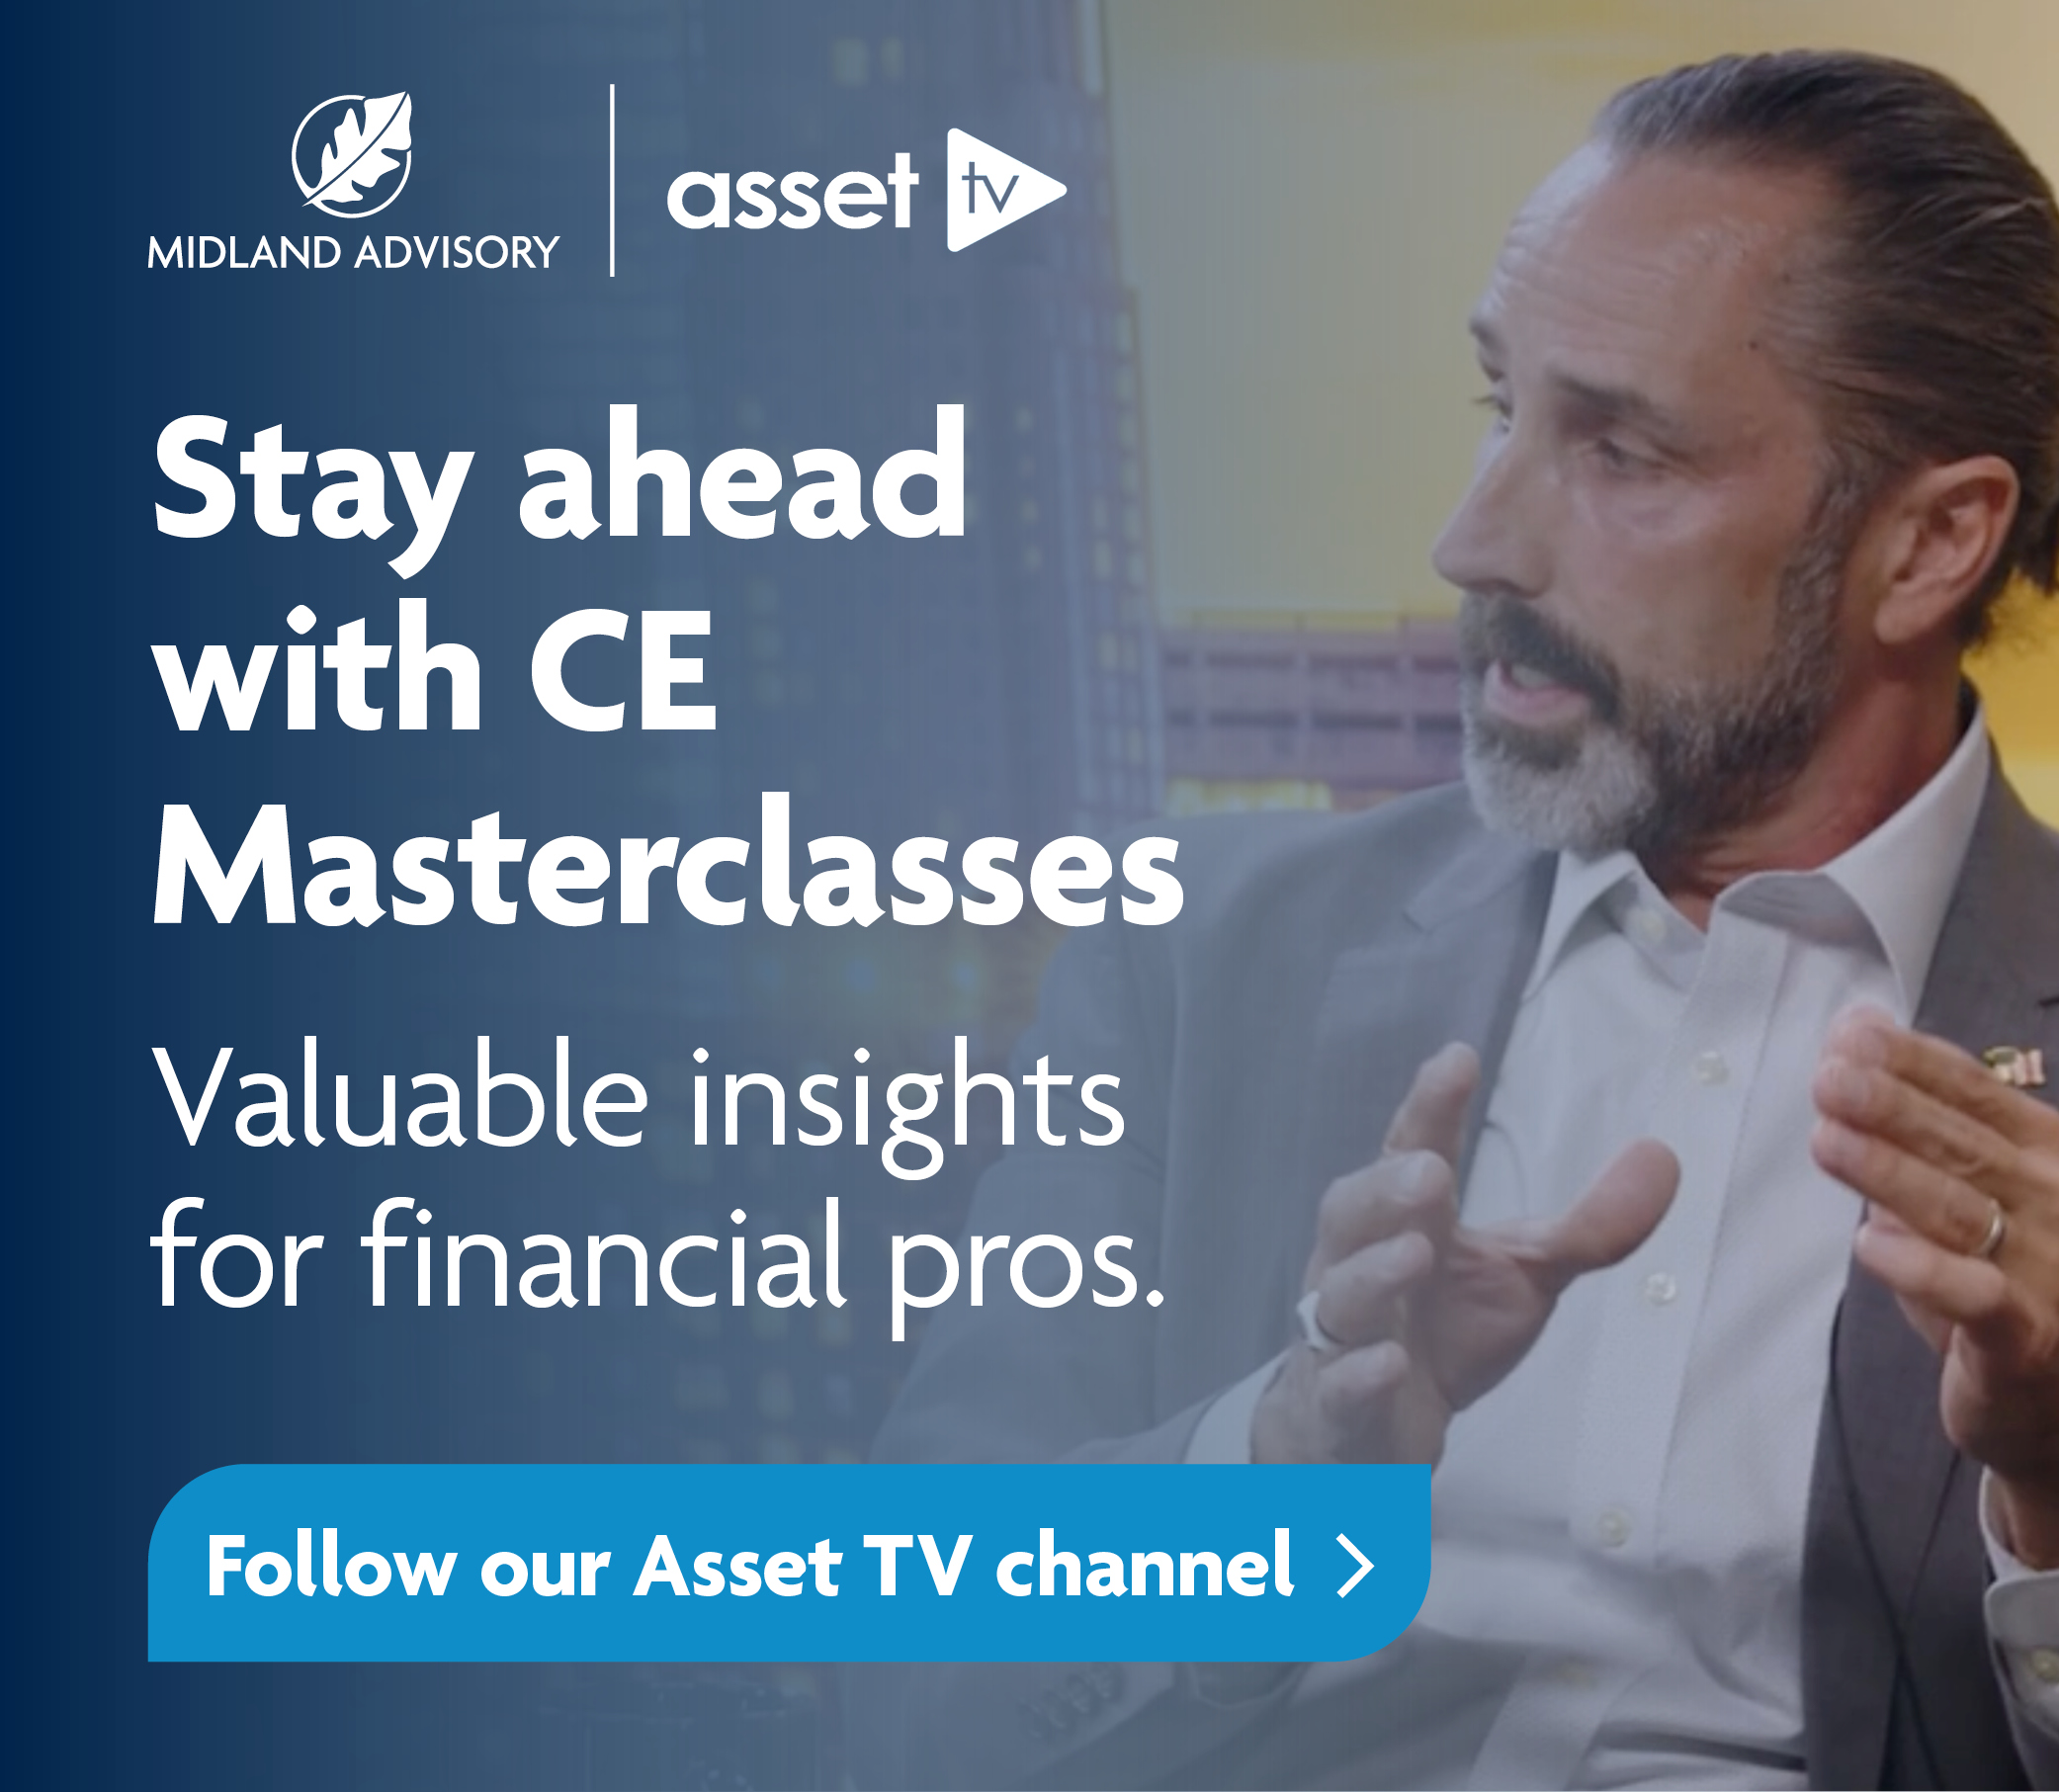 Stay ahead with CE Masterclasses. Valuable insights for financial pros. Follow our Asset TV channel.